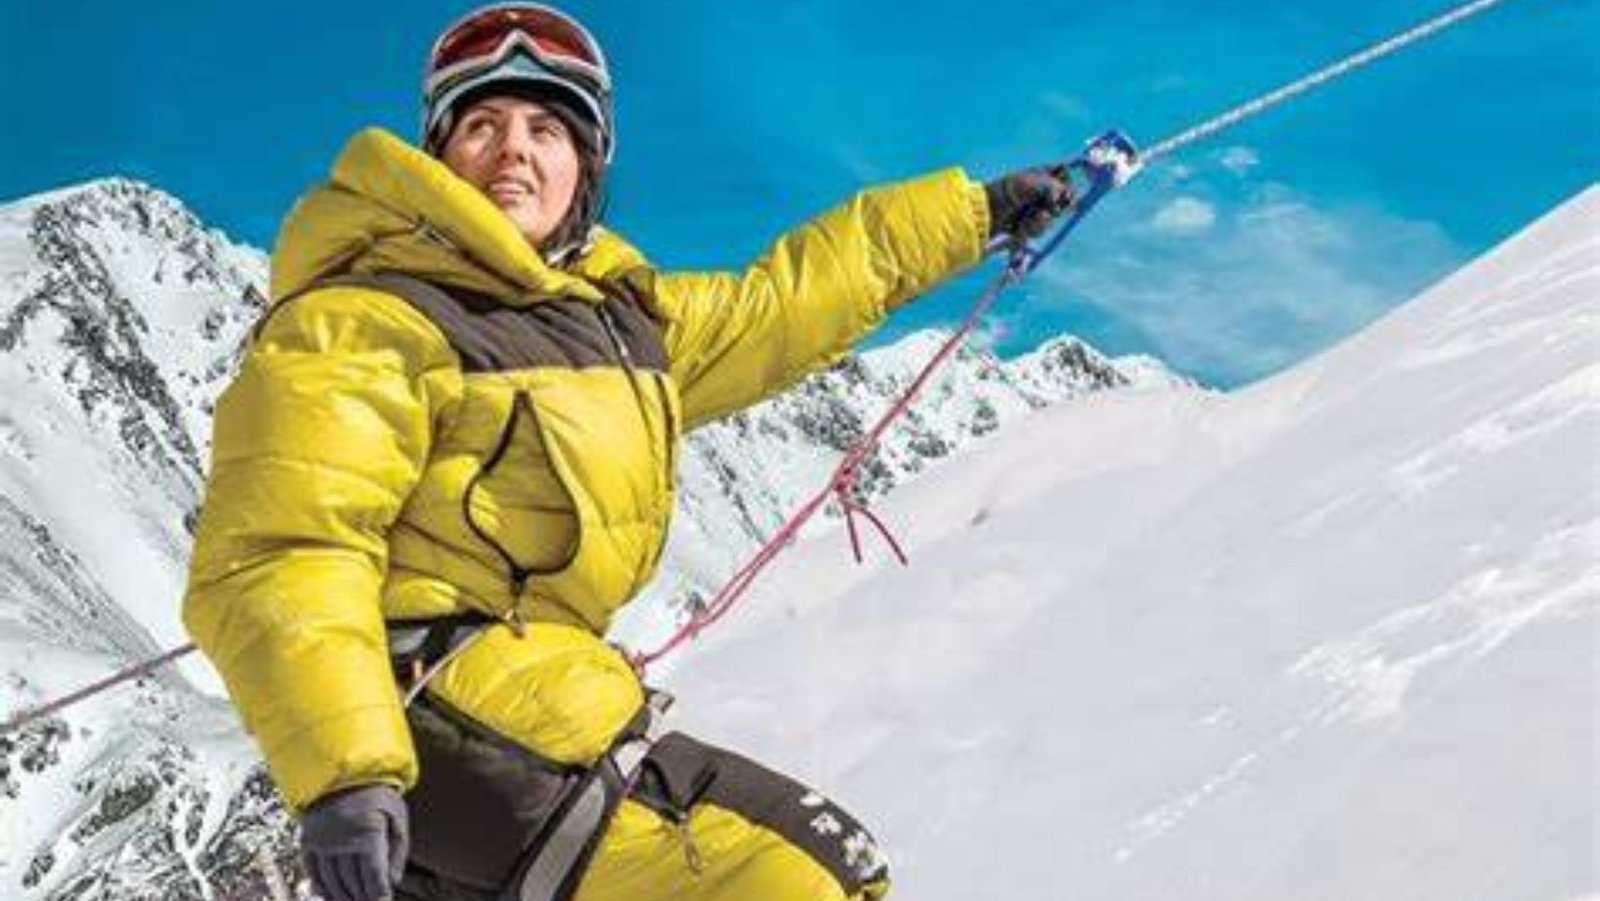 Samina Baig is the first woman from Pakistan to climb K2